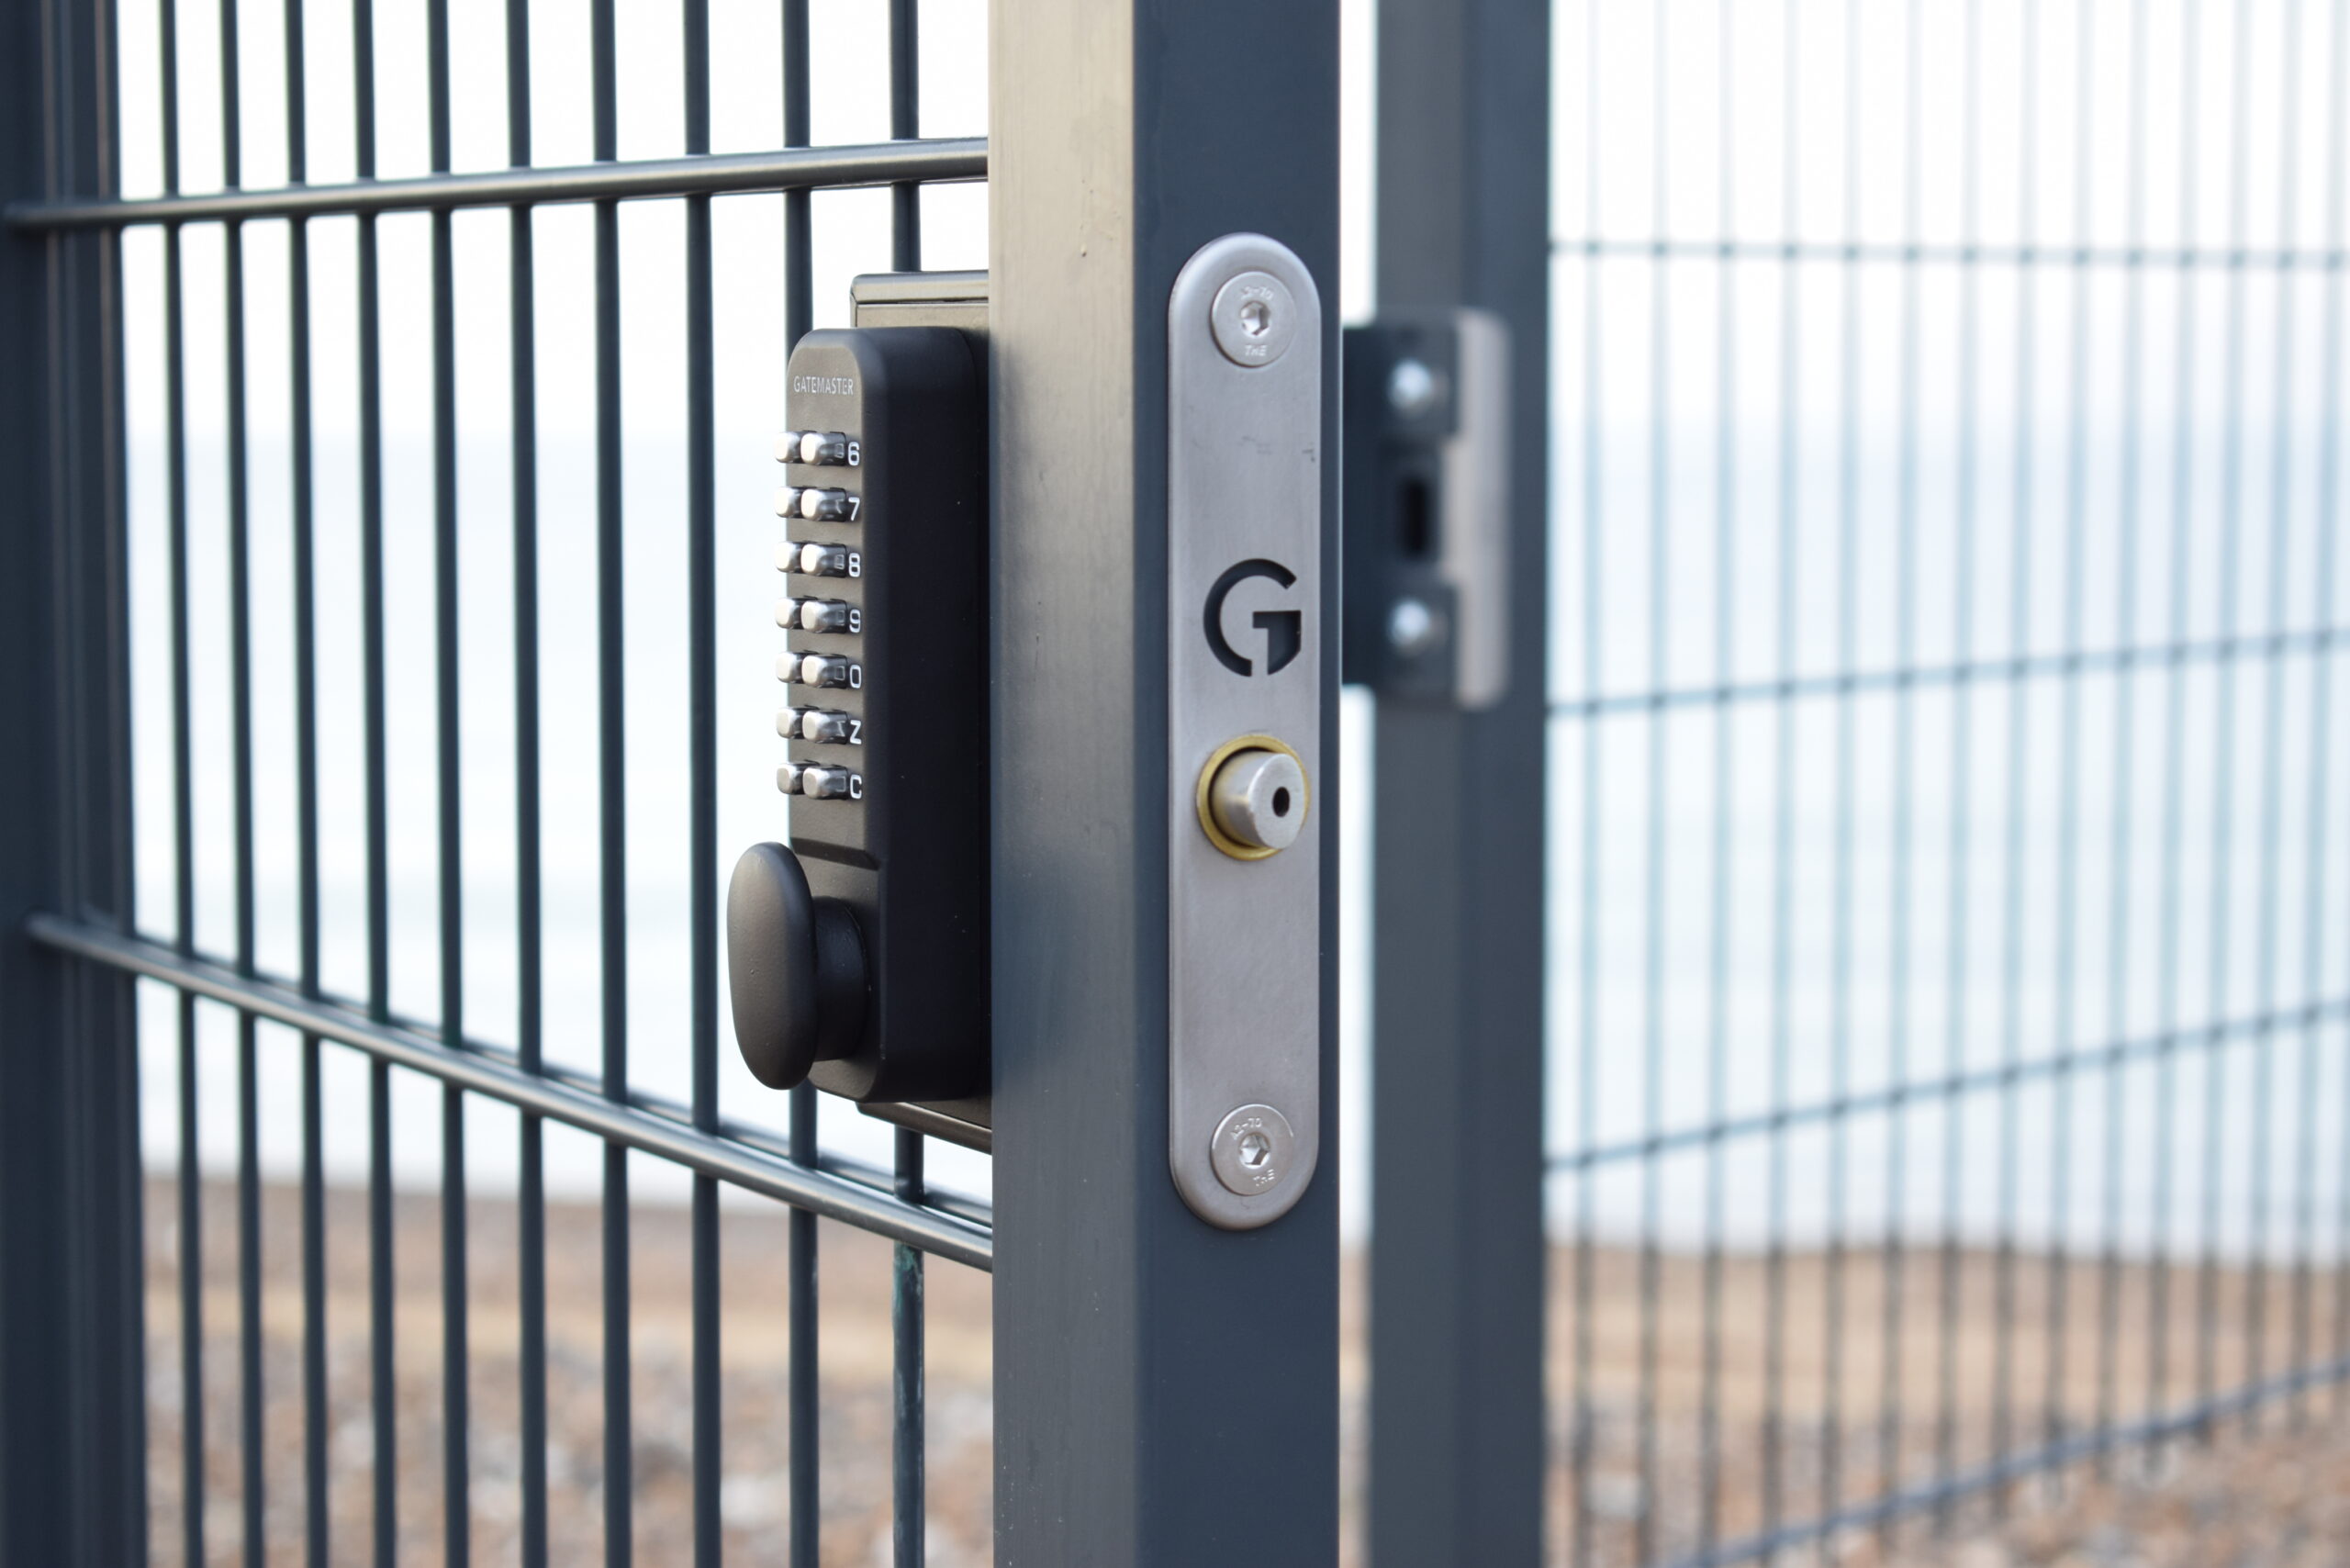 Keyless combination gate lock installed on grey powder coated steel gate. Gate is on beech with blurred water in the background.